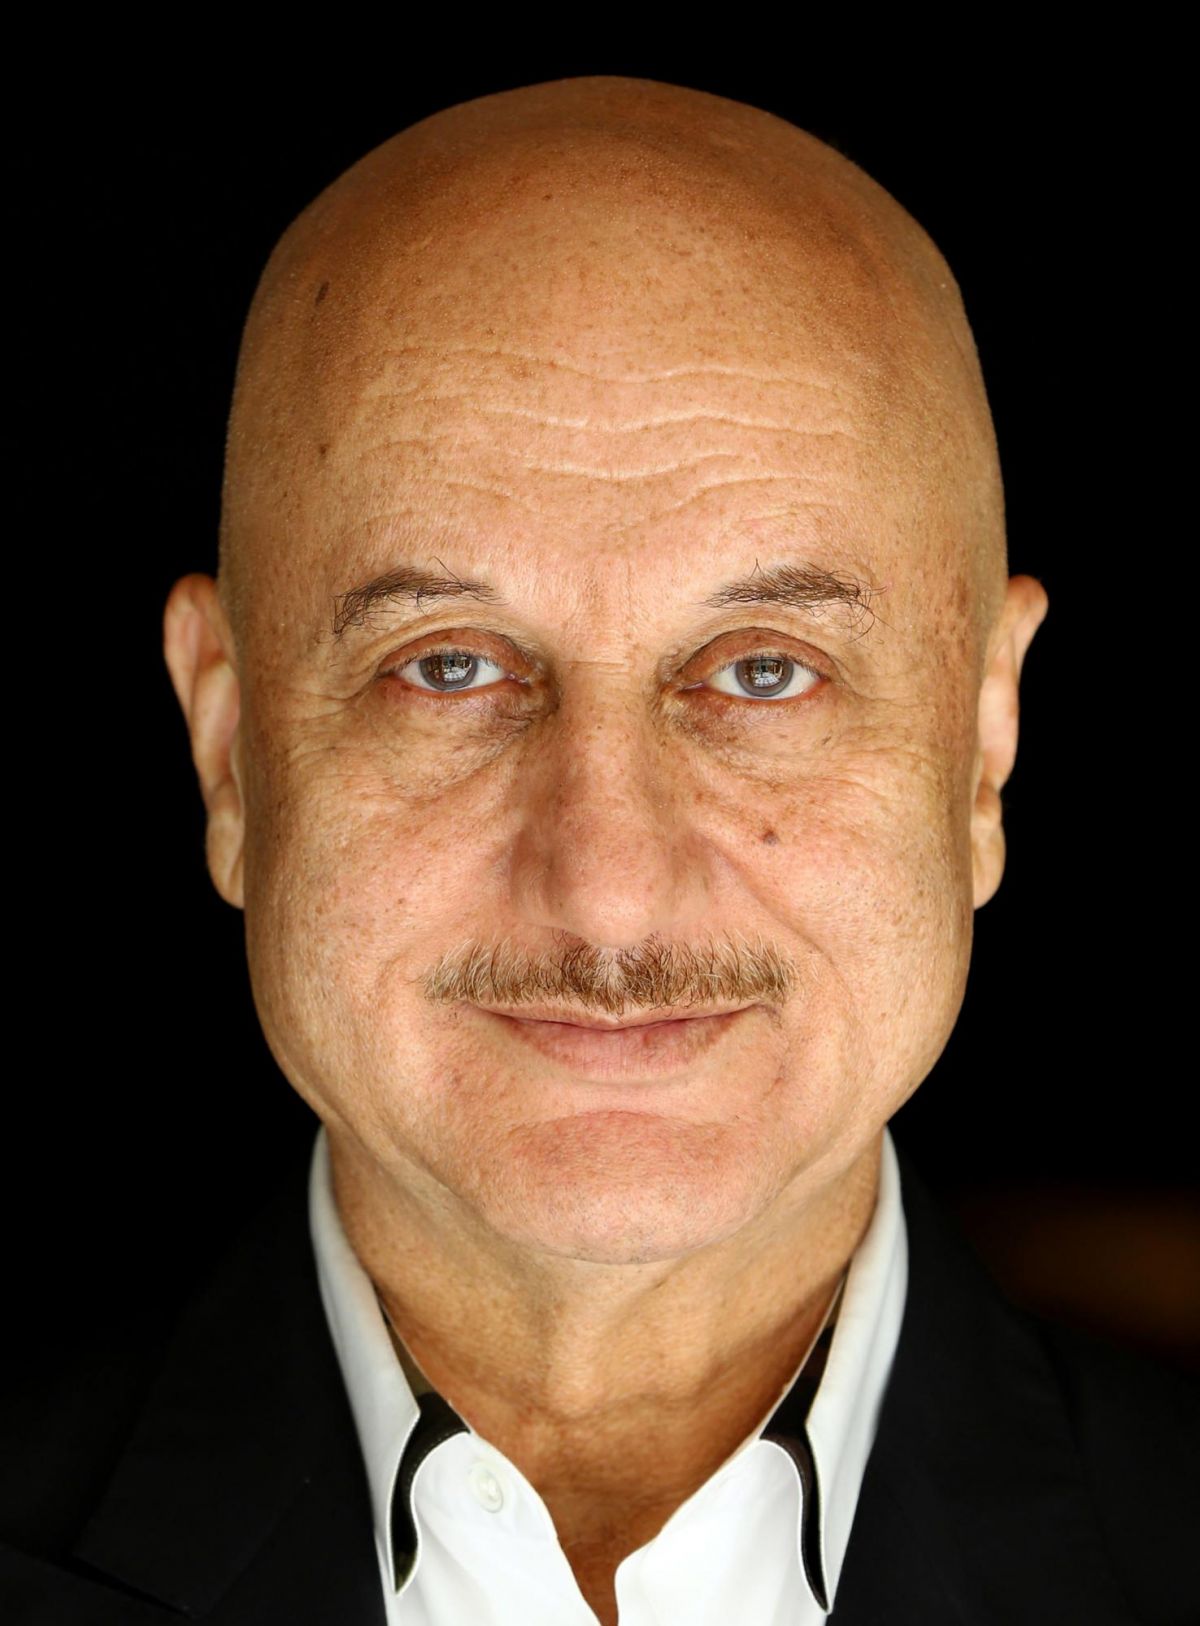 Anupam Kher shares supercute video, it will remind you of childhood